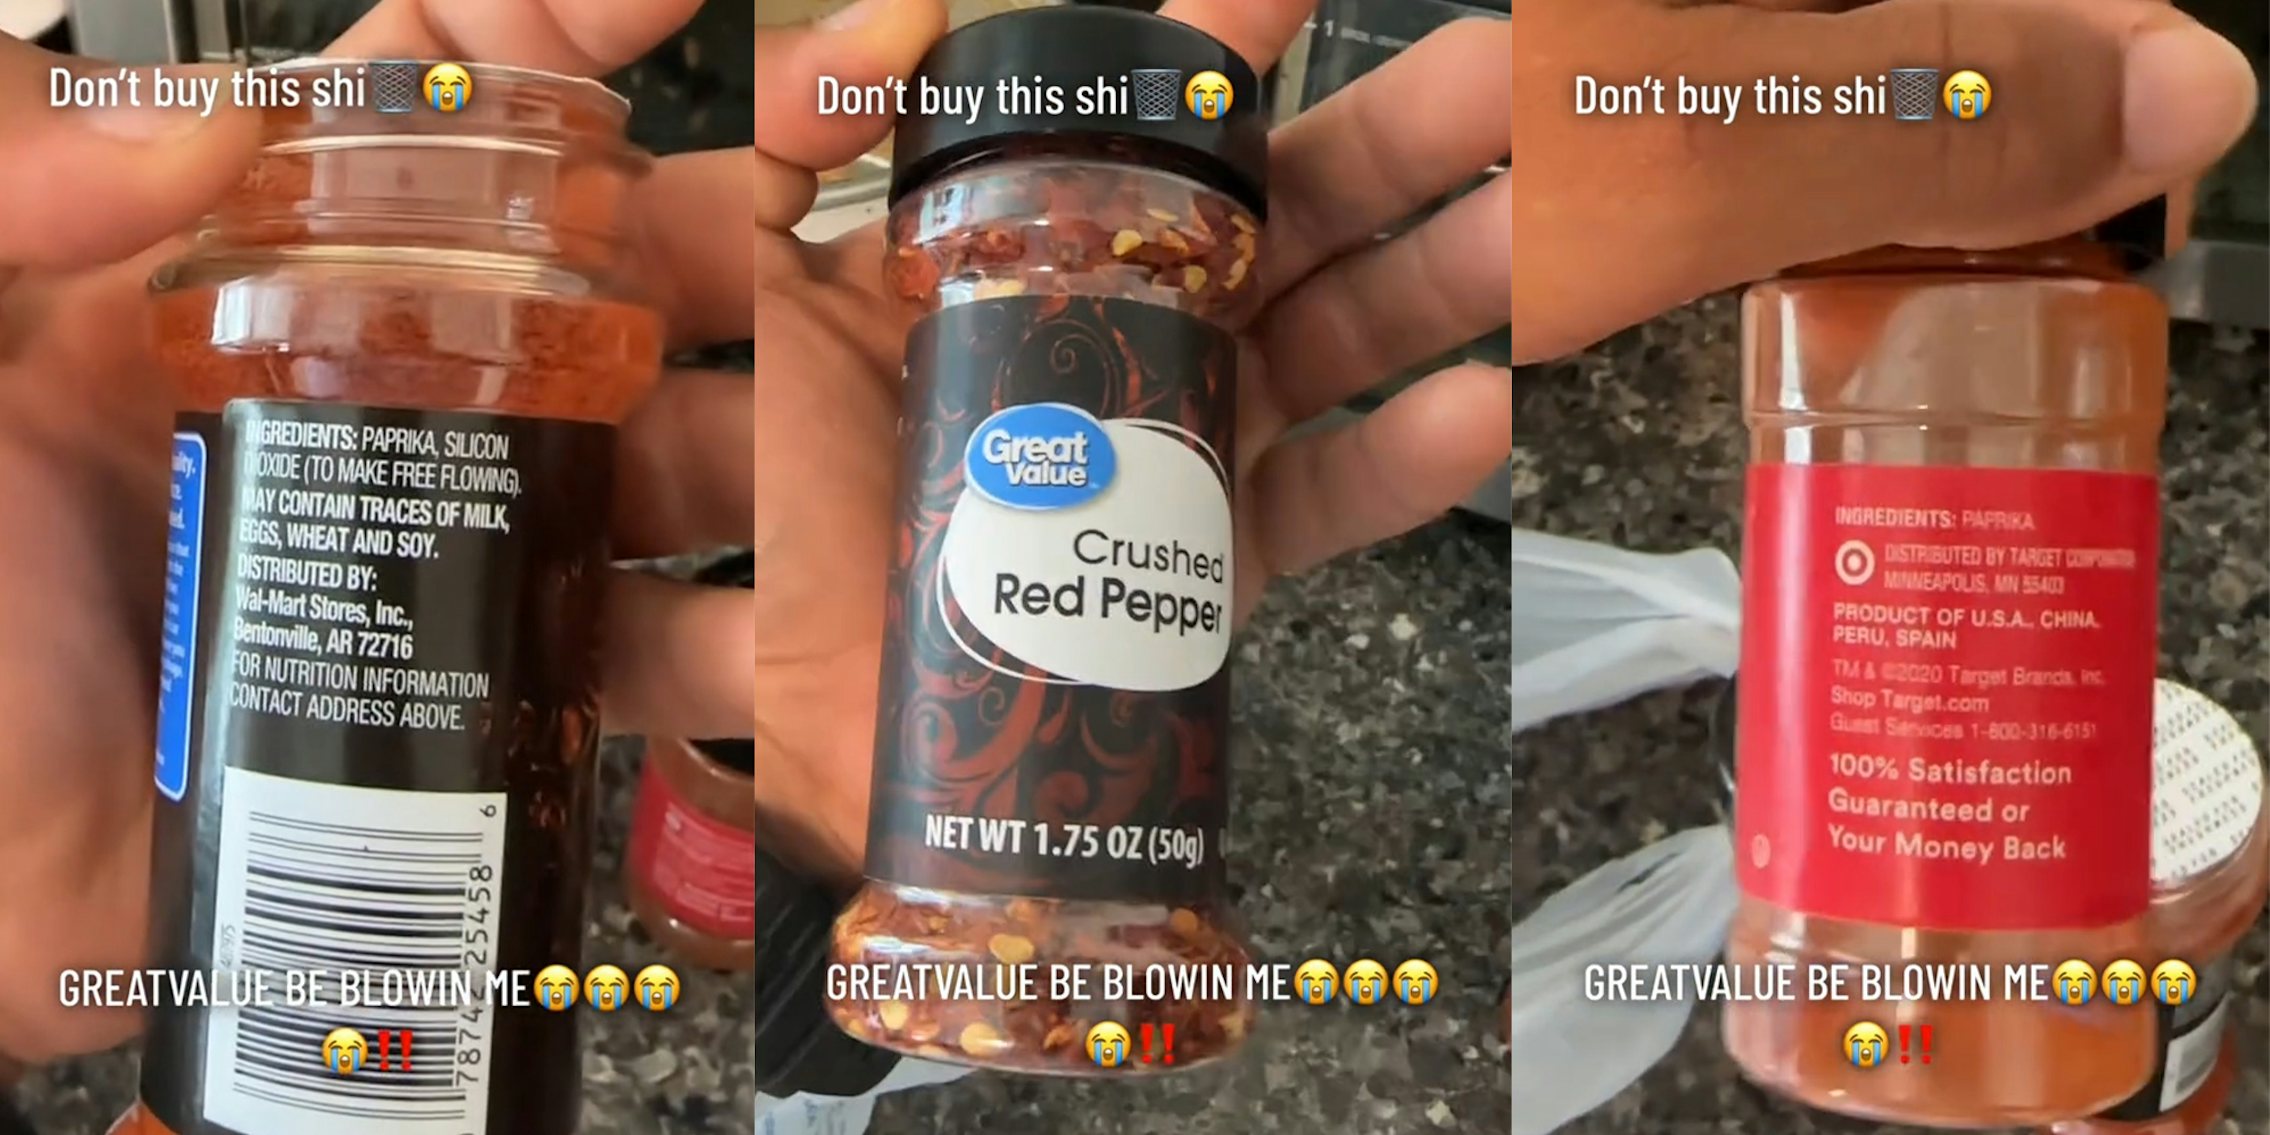 Customer calls out Great Value red chili flakes for missing ingredients on label